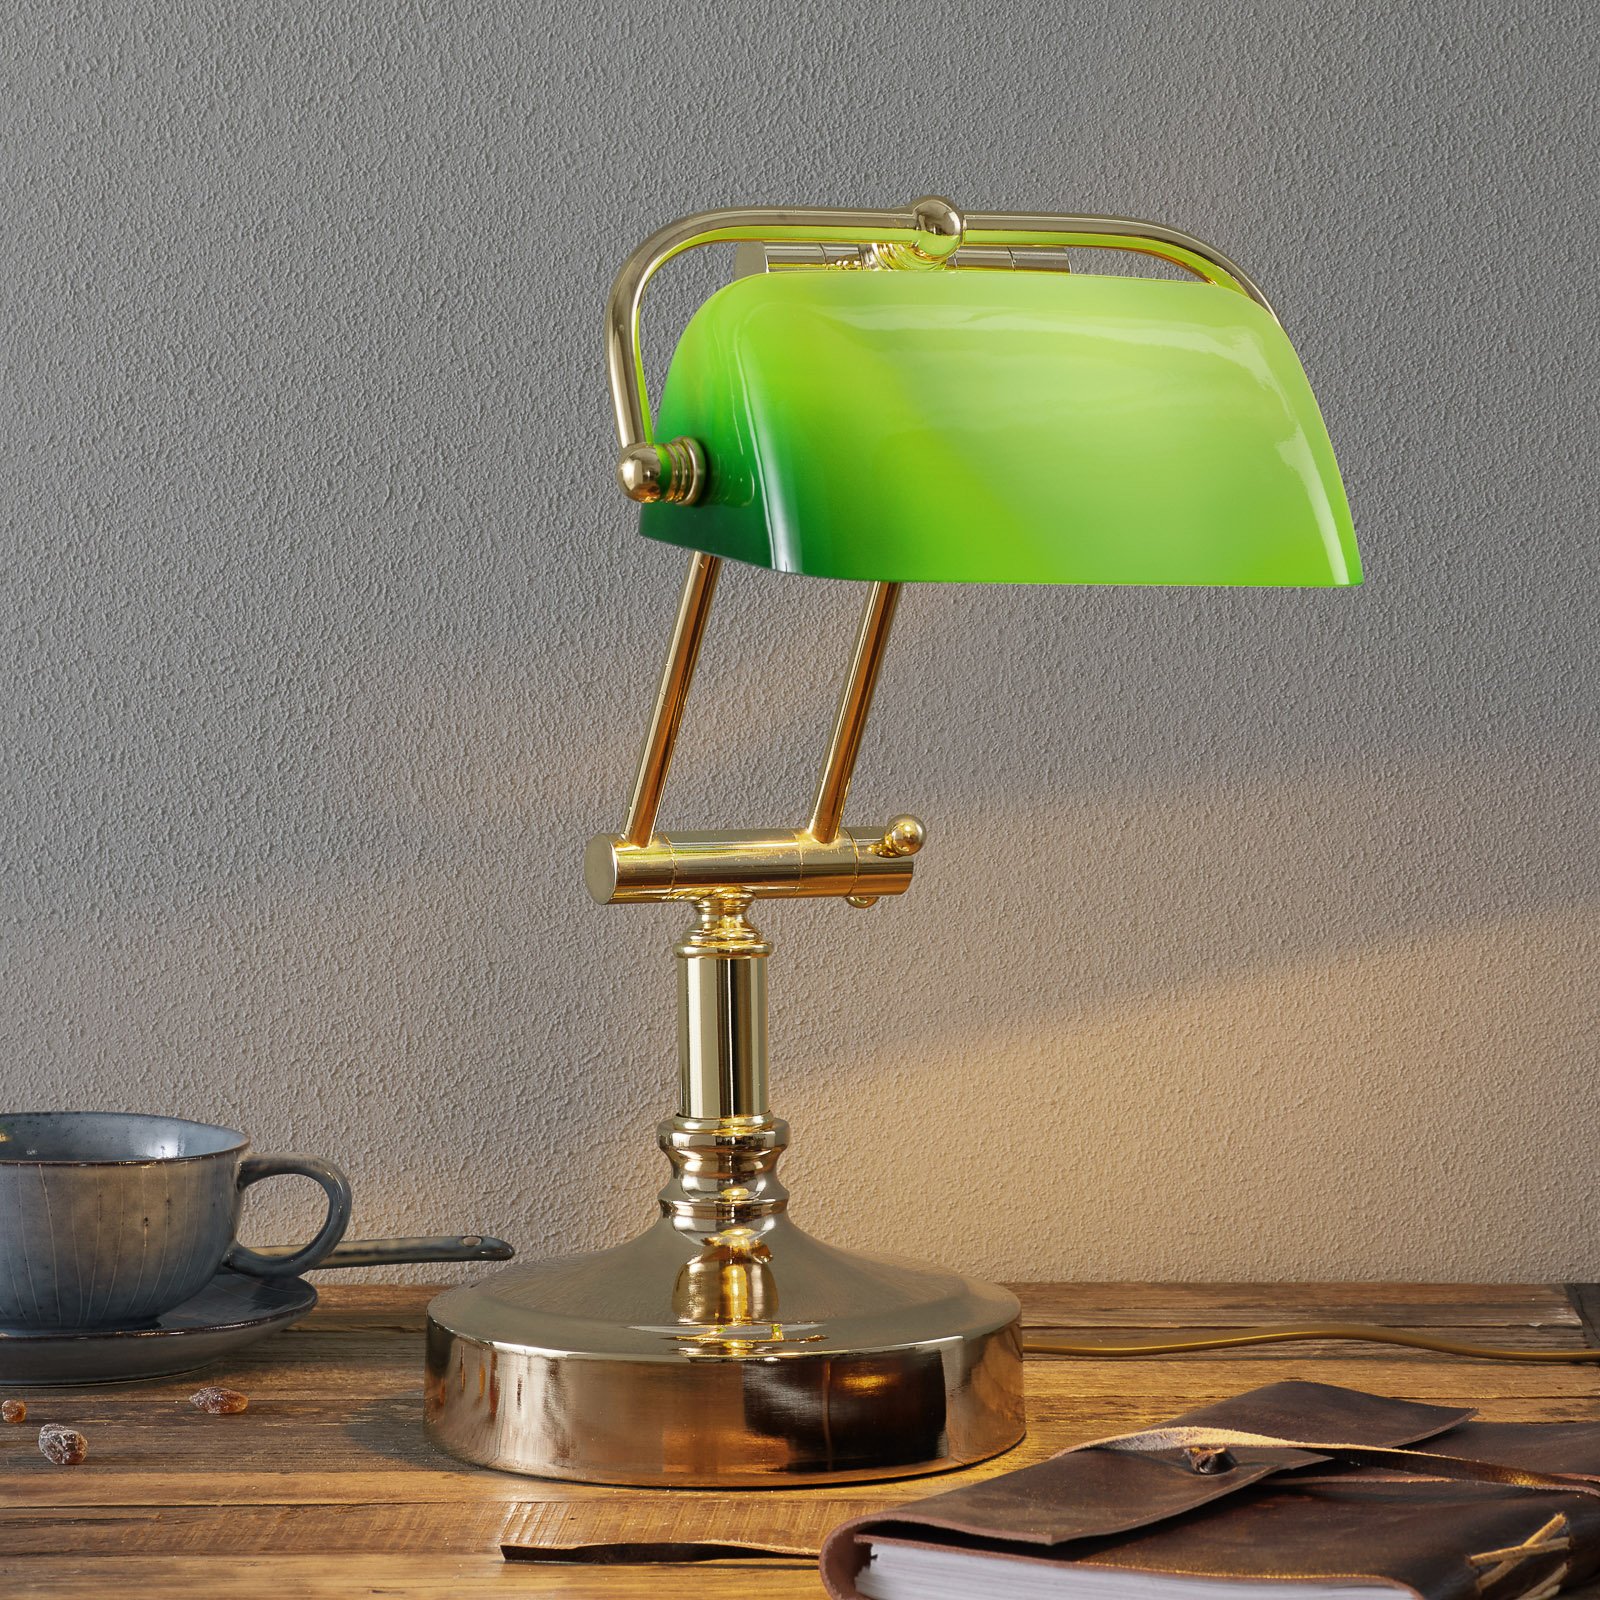 Banker's lamp Steven with green glass shade